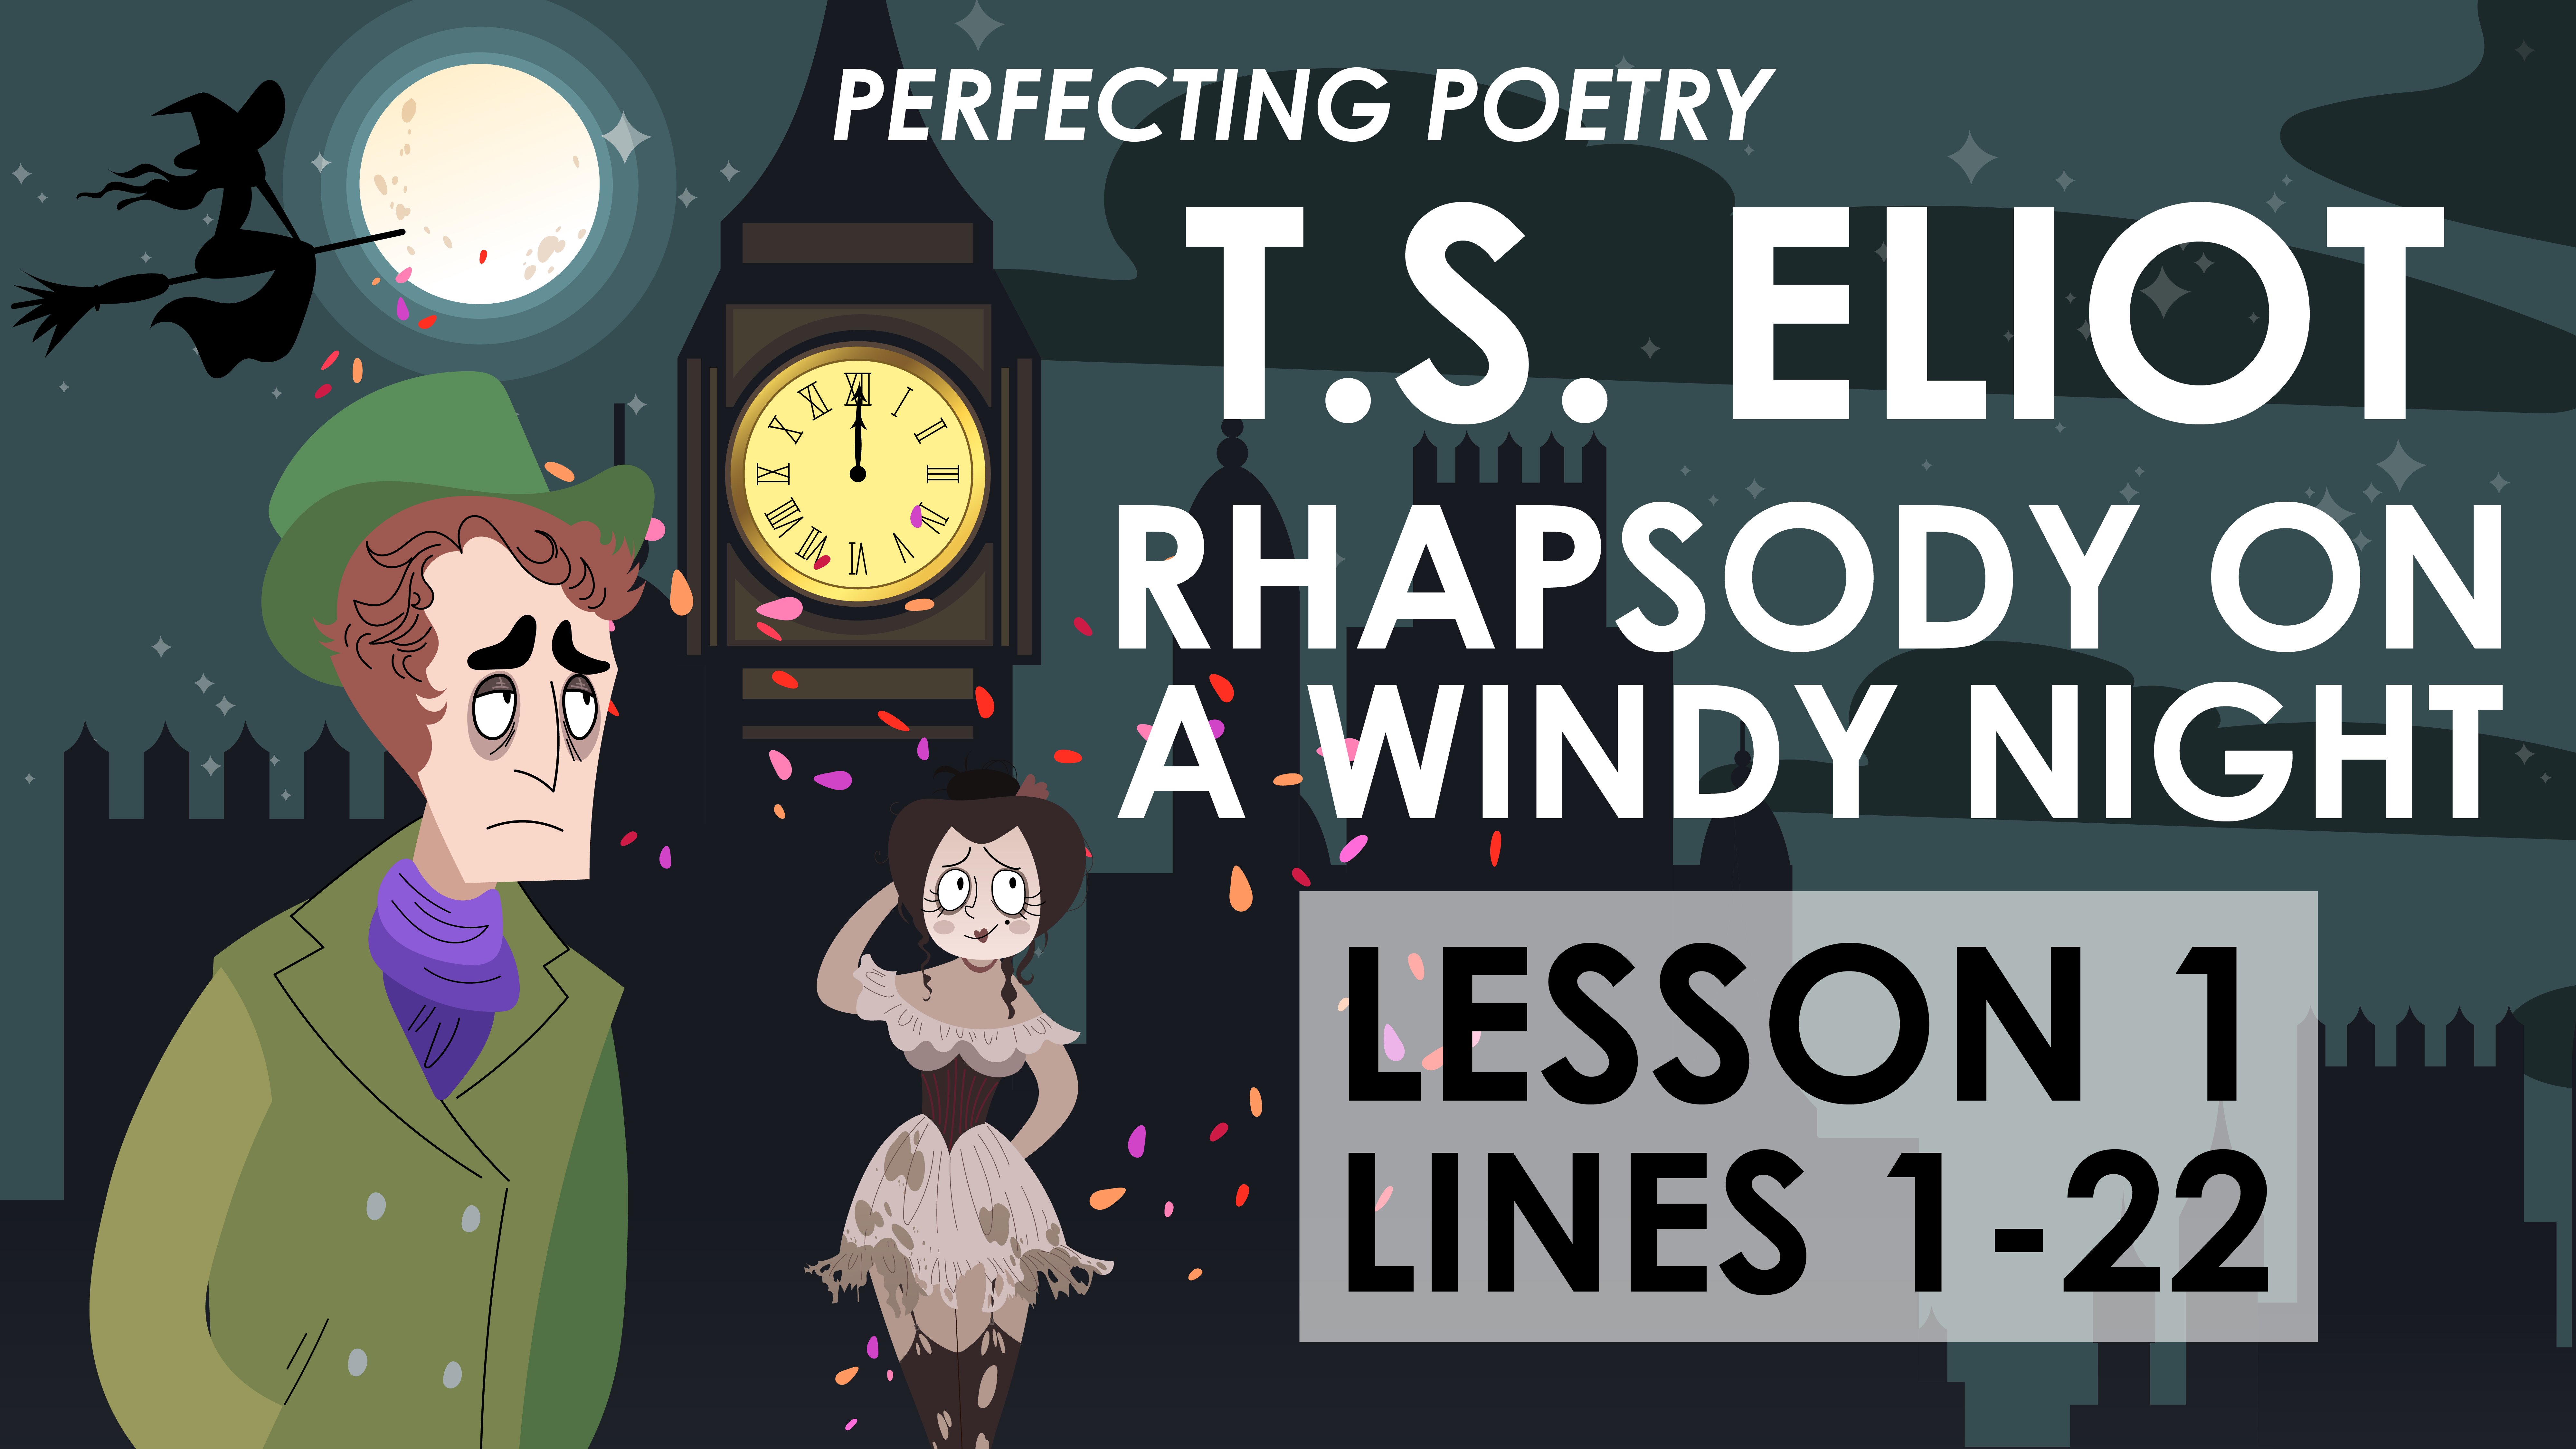 Rhapsody on a Windy Night - Lesson 1 - T.S. Eliot - Perfecting Poetry